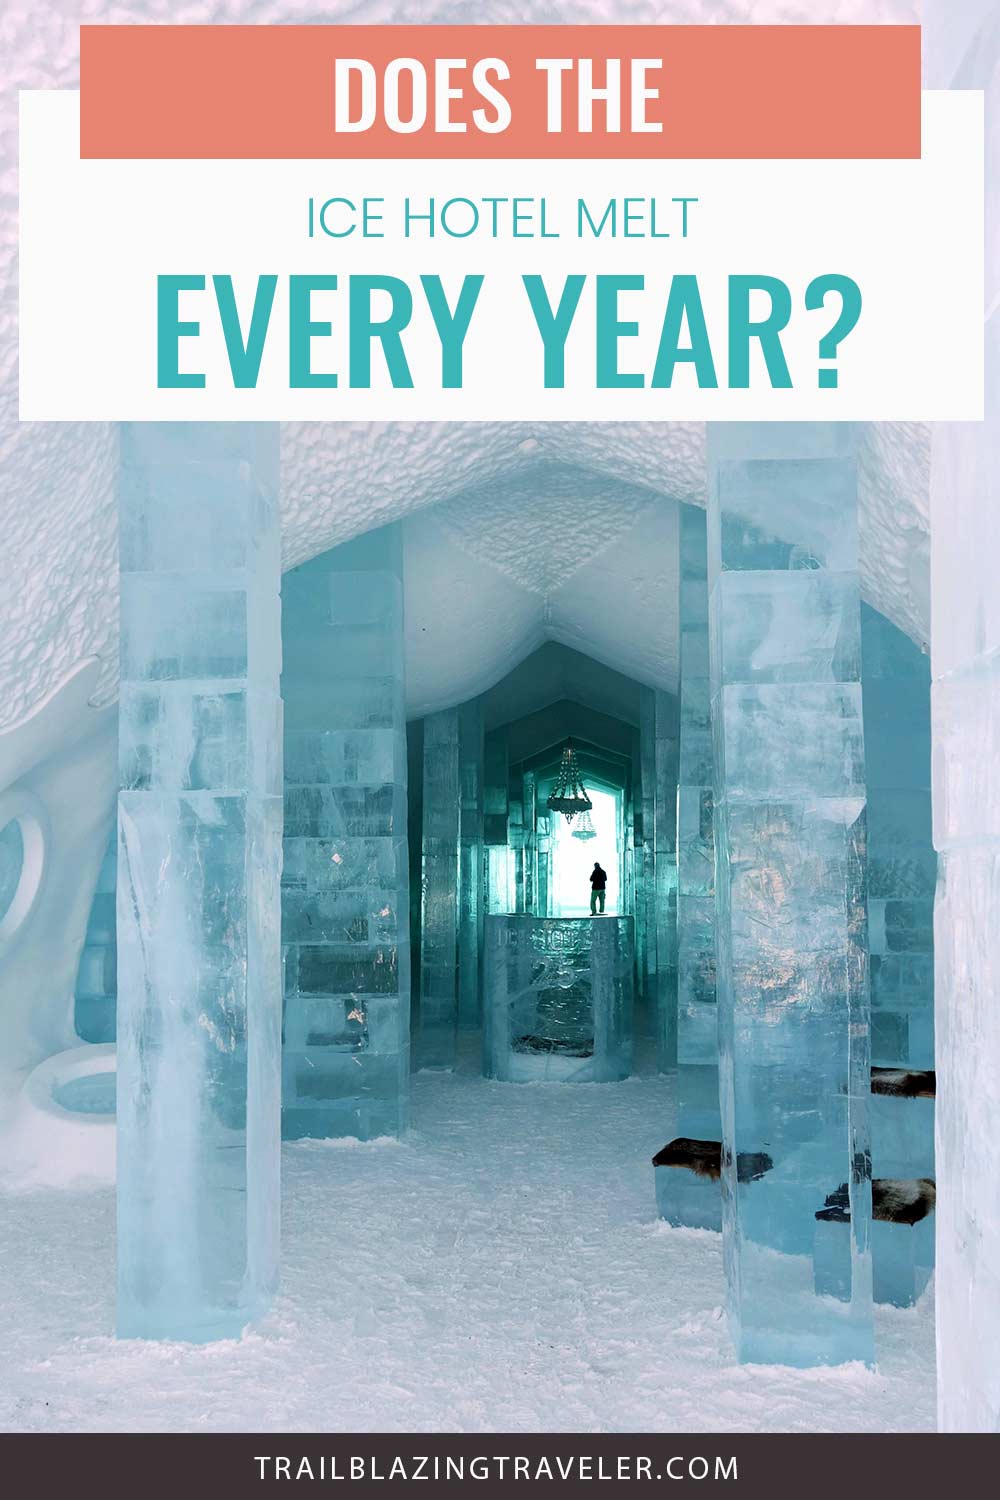 Does The Ice Hotel Melt Every Year?